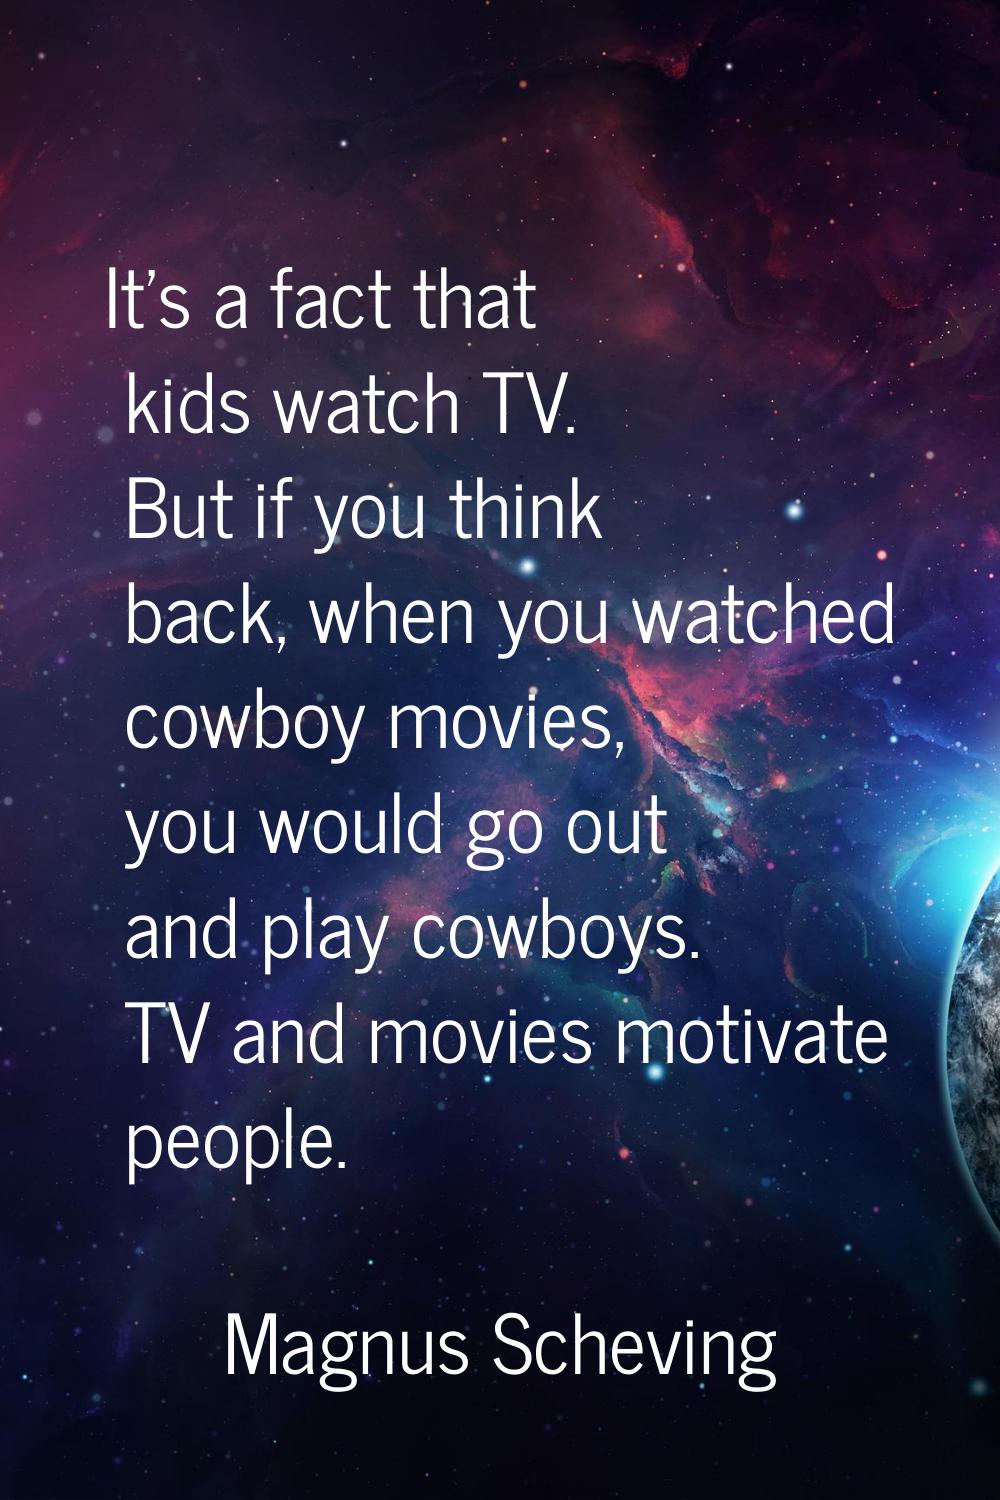 It's a fact that kids watch TV. But if you think back, when you watched cowboy movies, you would go